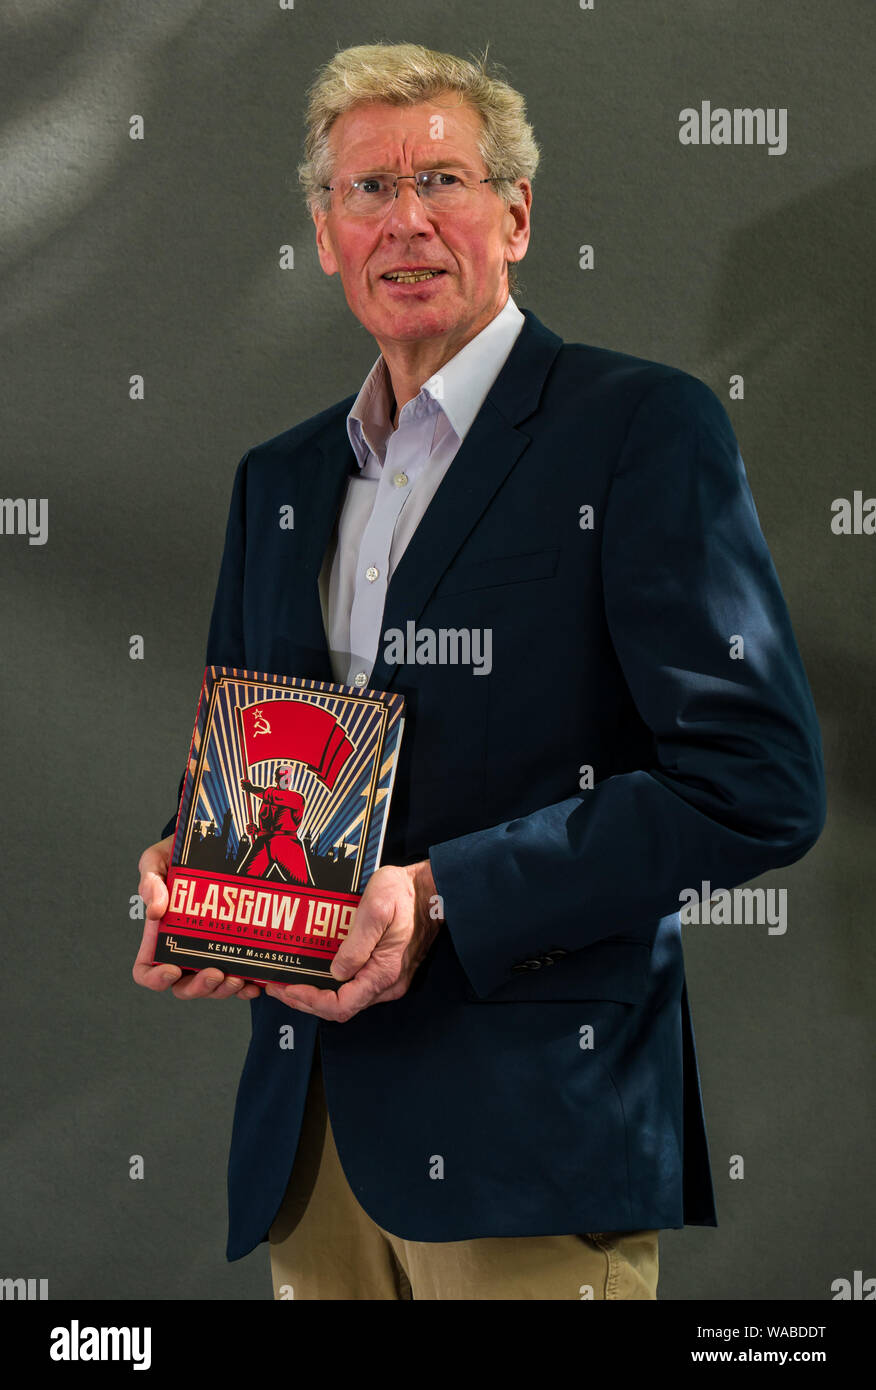 Edinburgh, Scotland, UK, 19th August 2019. Edinburgh International Book Festival. Pictured: Kenny MacAskill, former Cabinet Secretary for Justice in the Scottish Government, holds his book called Glasgow 1919 Stock Photo